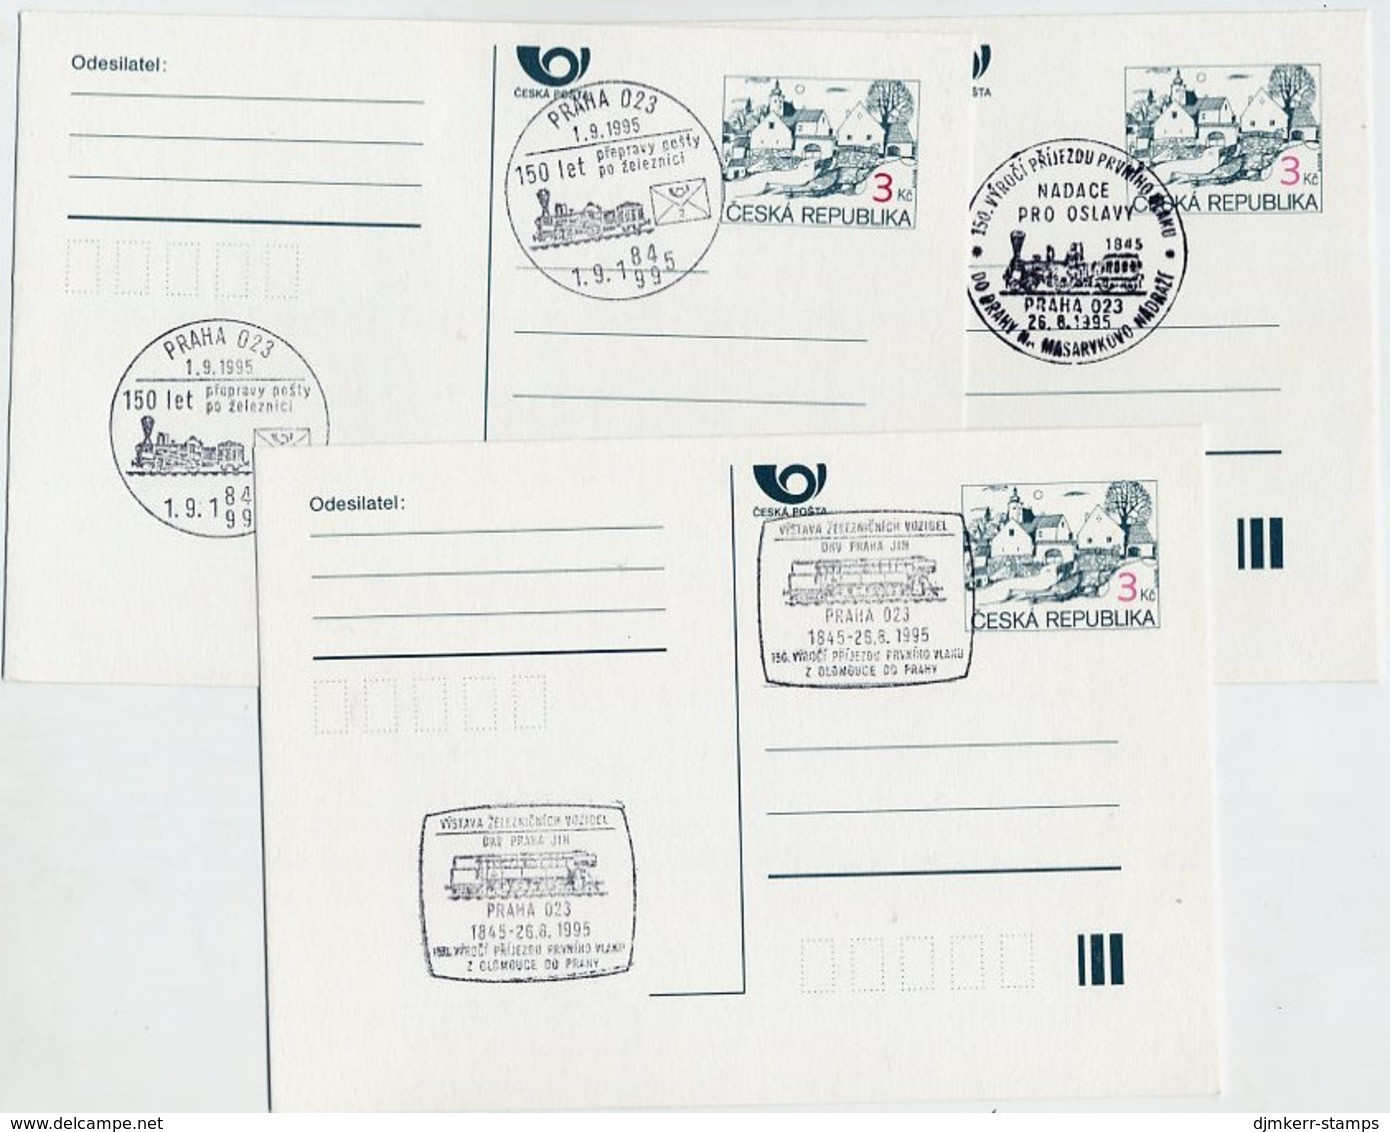 CZECH REPUBLIC 1995 Railway Anniversary 3 Kc.stationery Cards Cancelled With Commemorative Postmarks. - Storia Postale